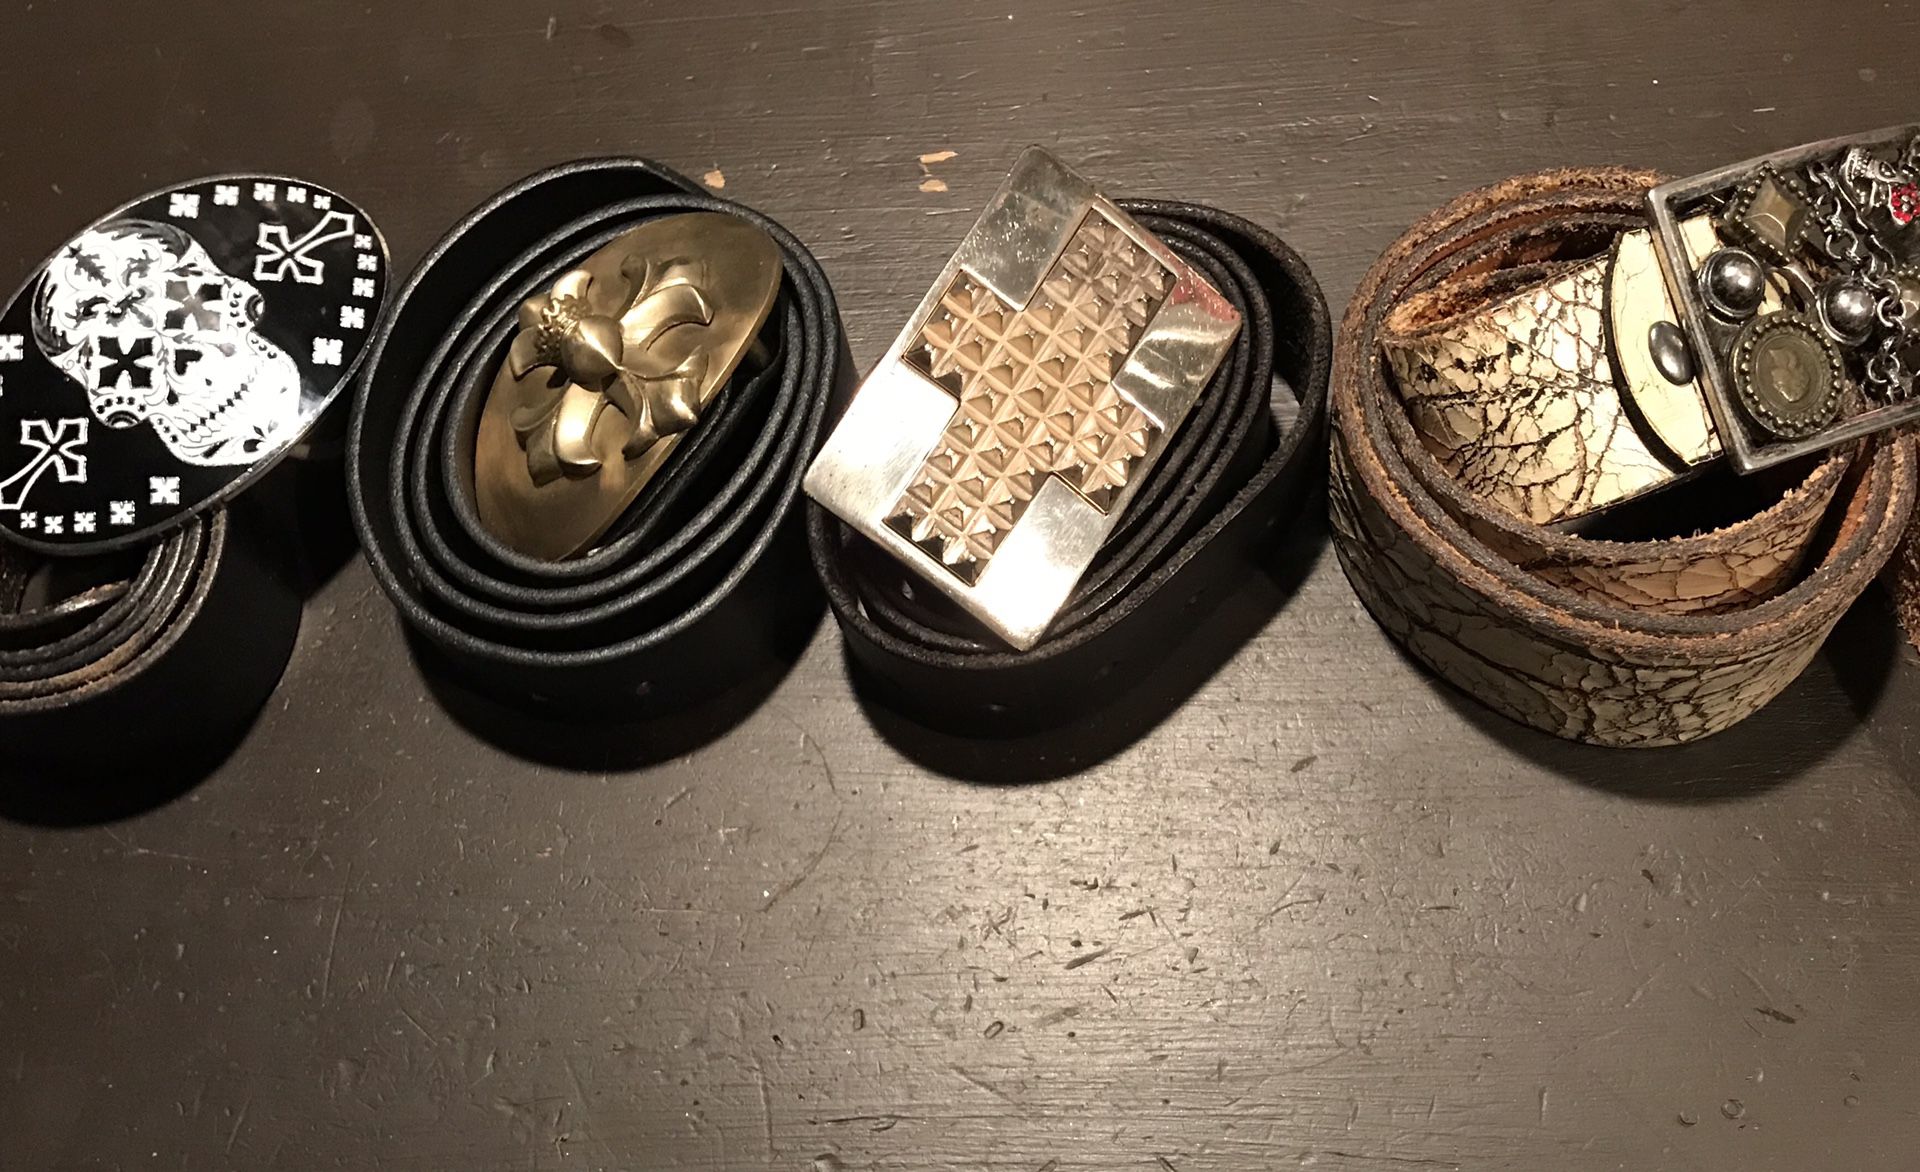 High End Belts size 38/40 (King Baby, and two others of high end value)